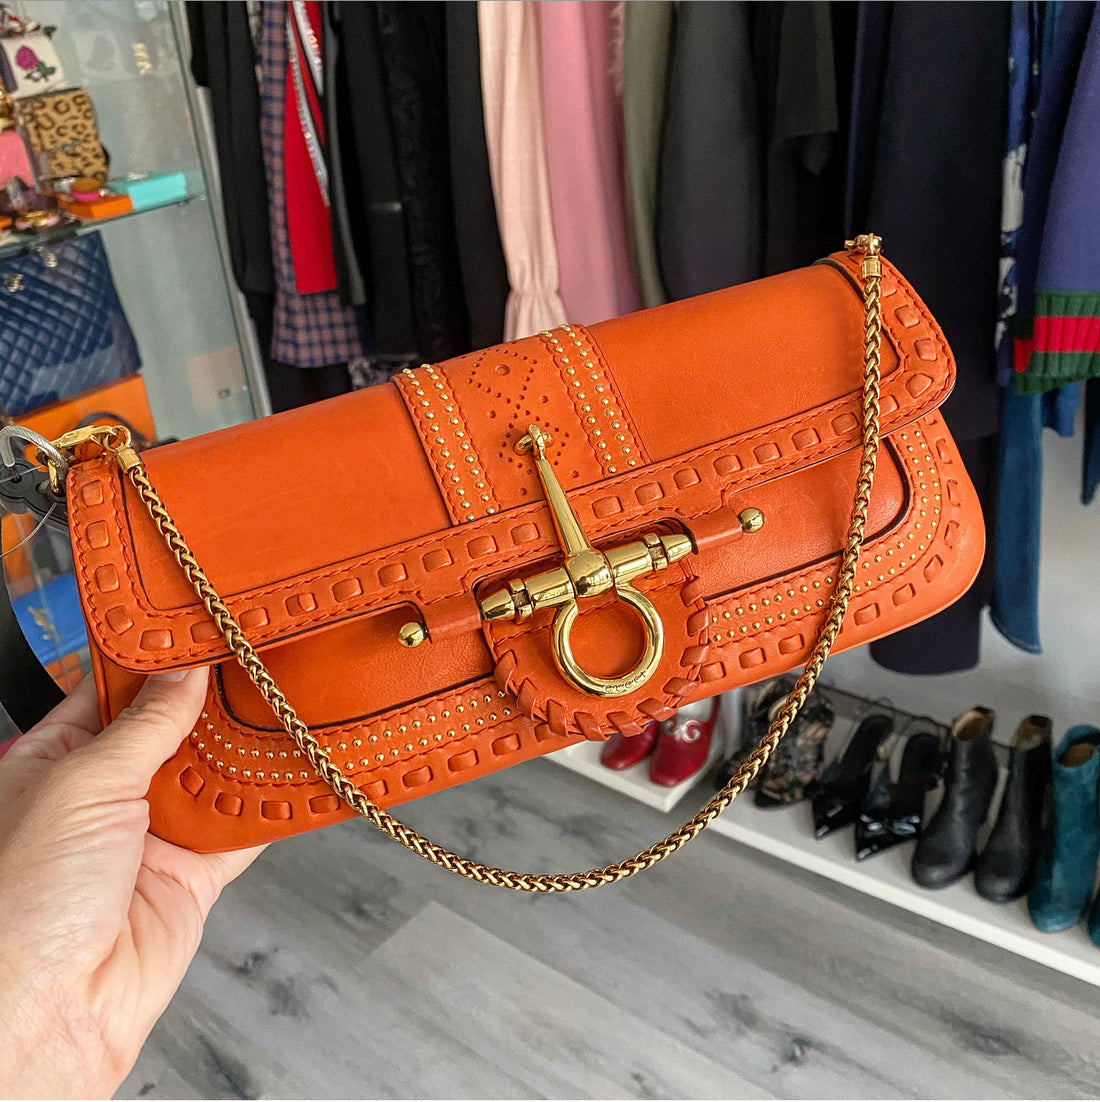 Gucci Orange Leather Stud and Woven Small Baguette Bag